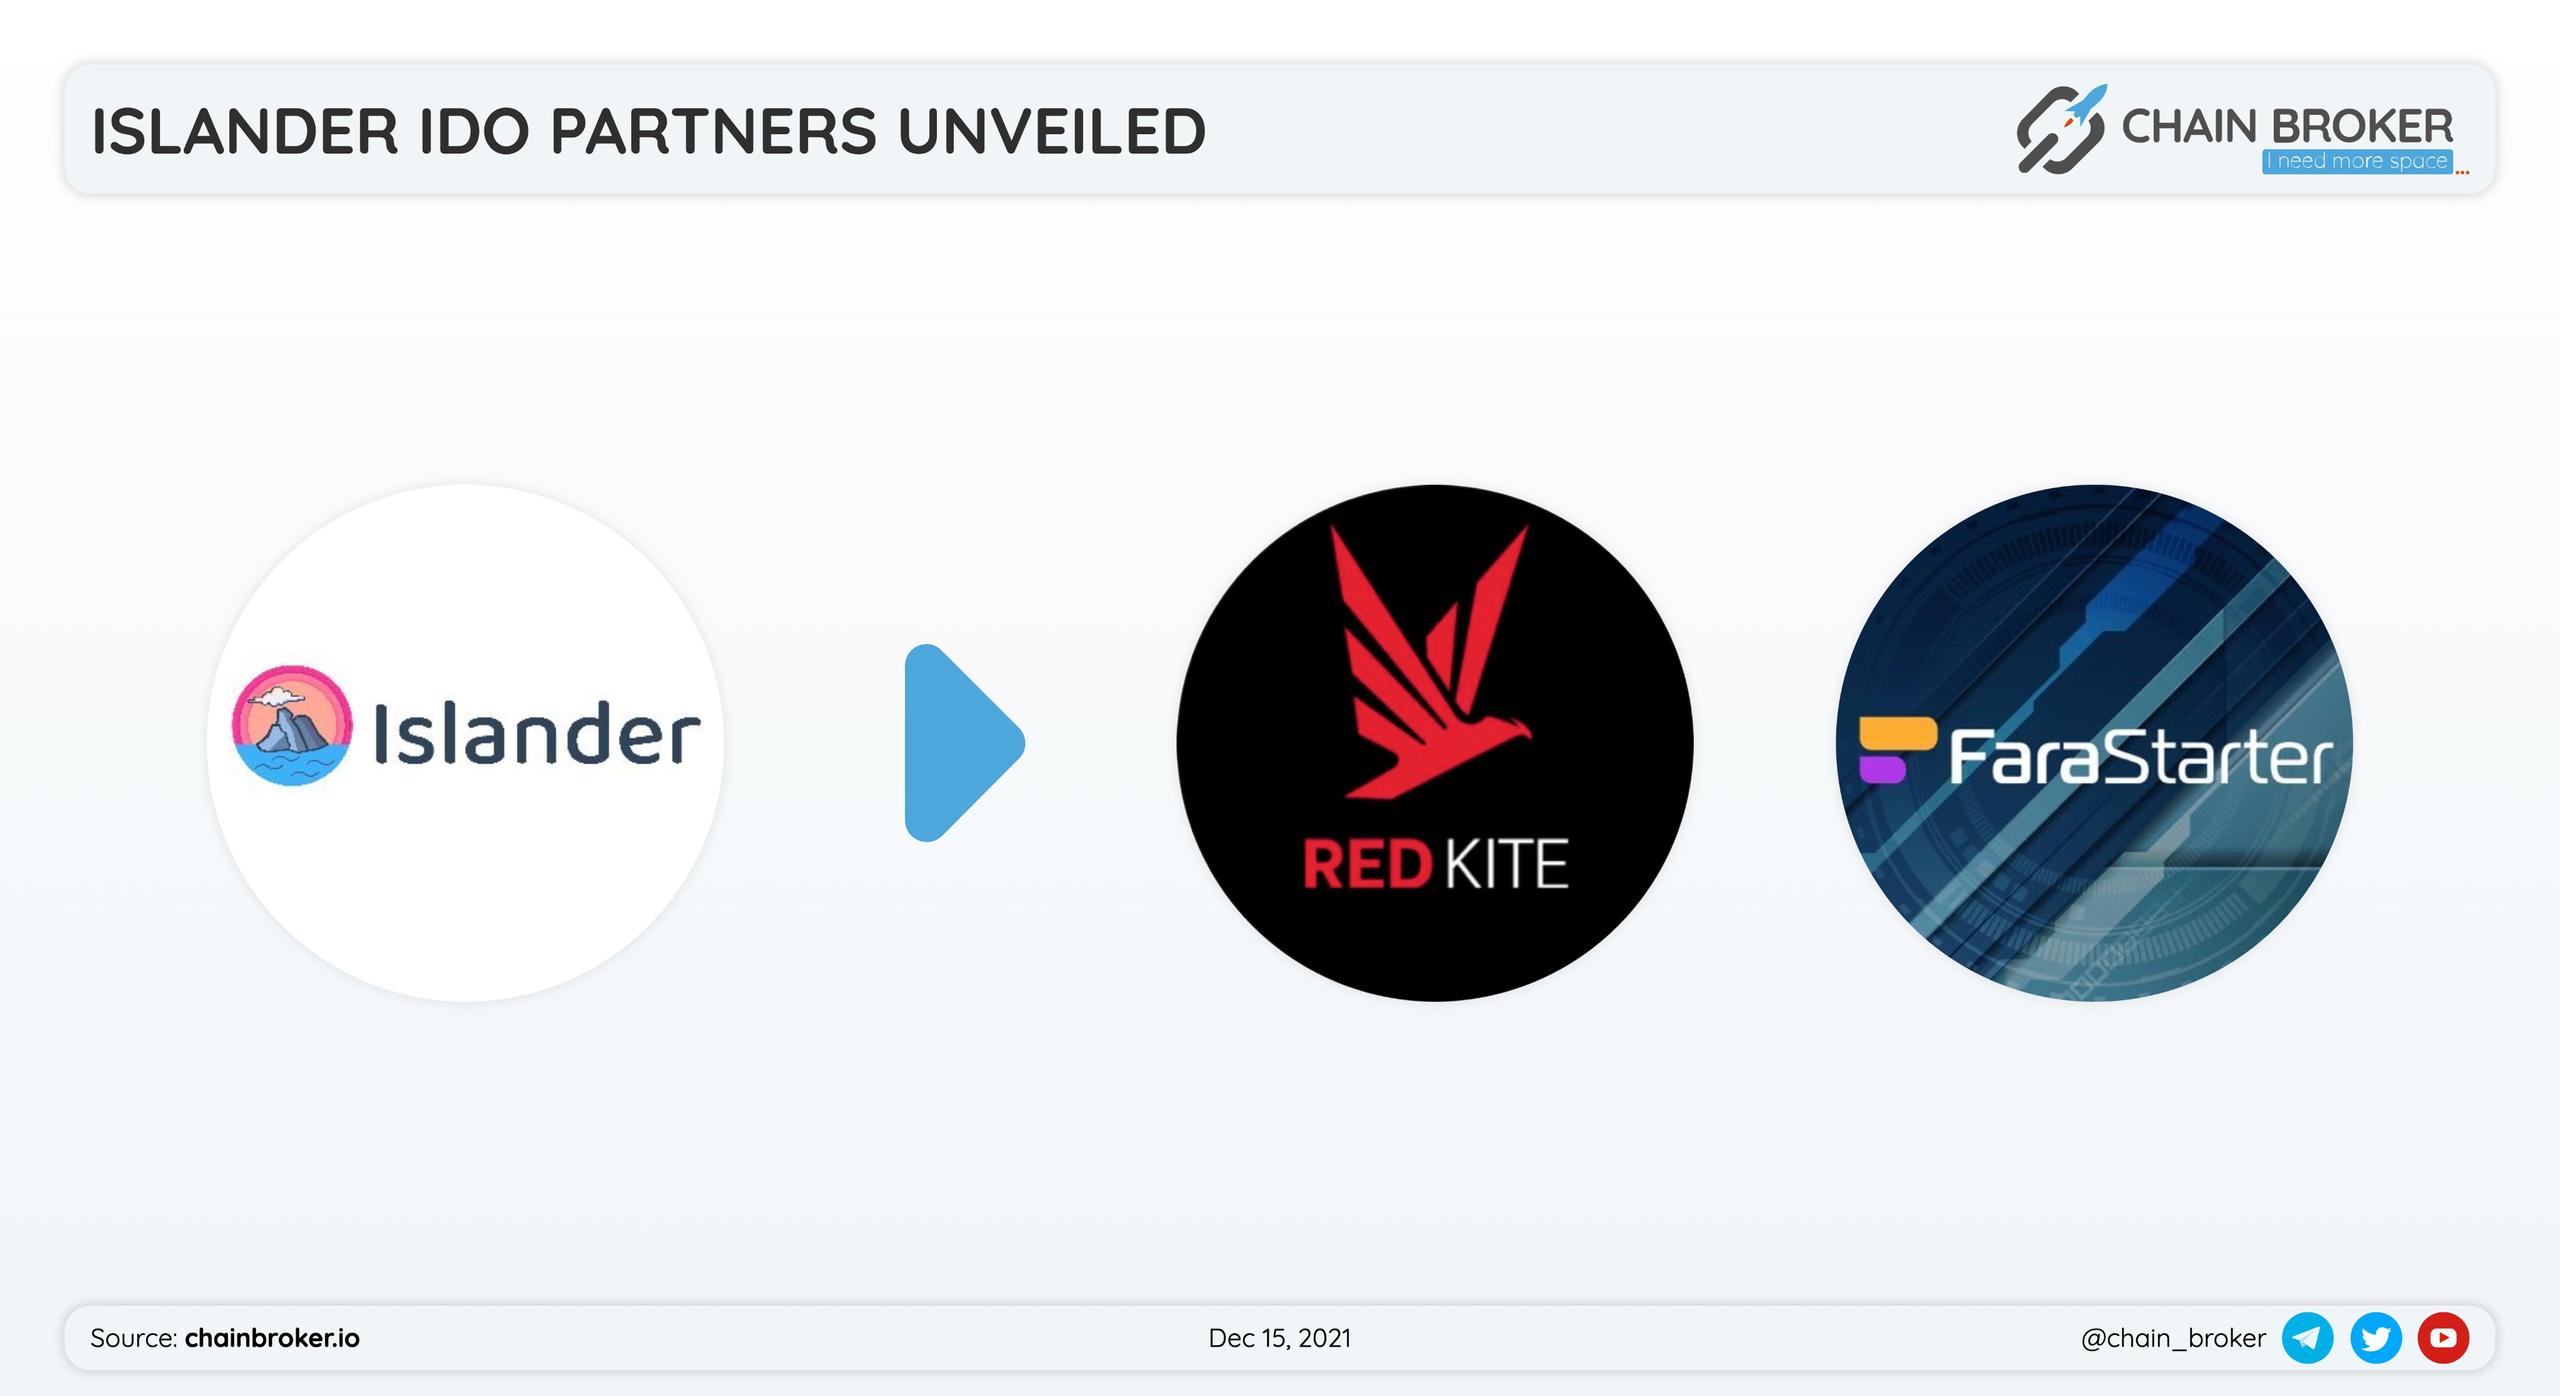 Islander has partnered with Red Kite by PolkaFoundry and FaraStarter for a token launch.